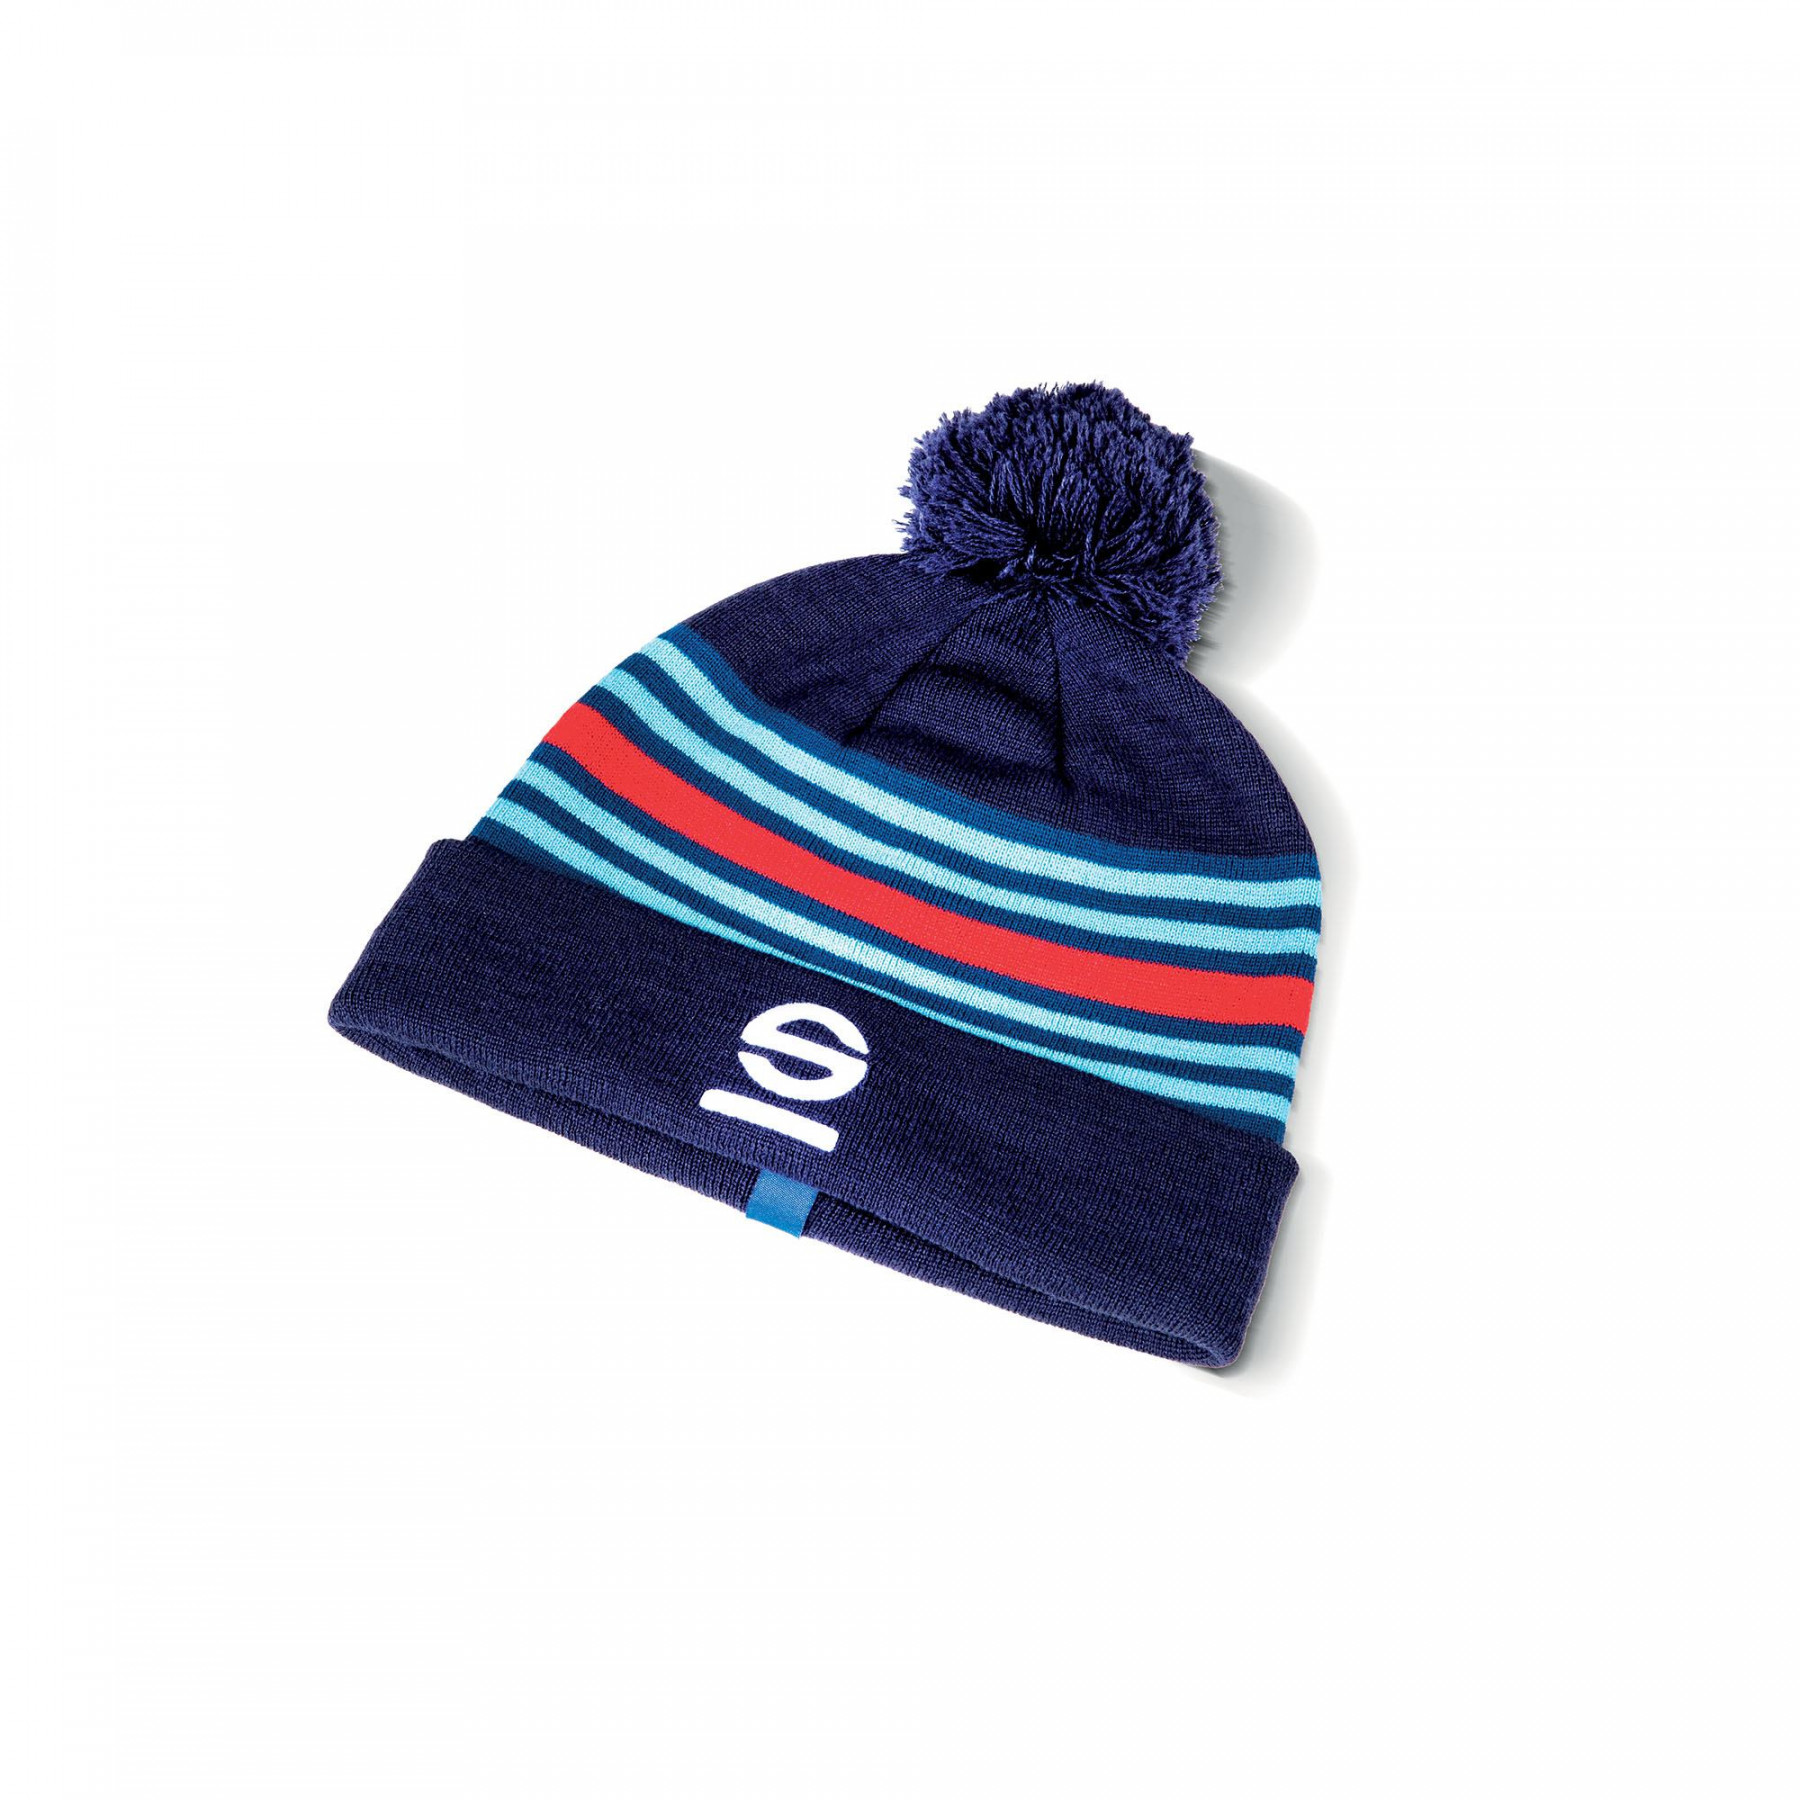 Sparco Martini Racing Bobble Beanie Hat Childs Size Motorsport Race Rally 